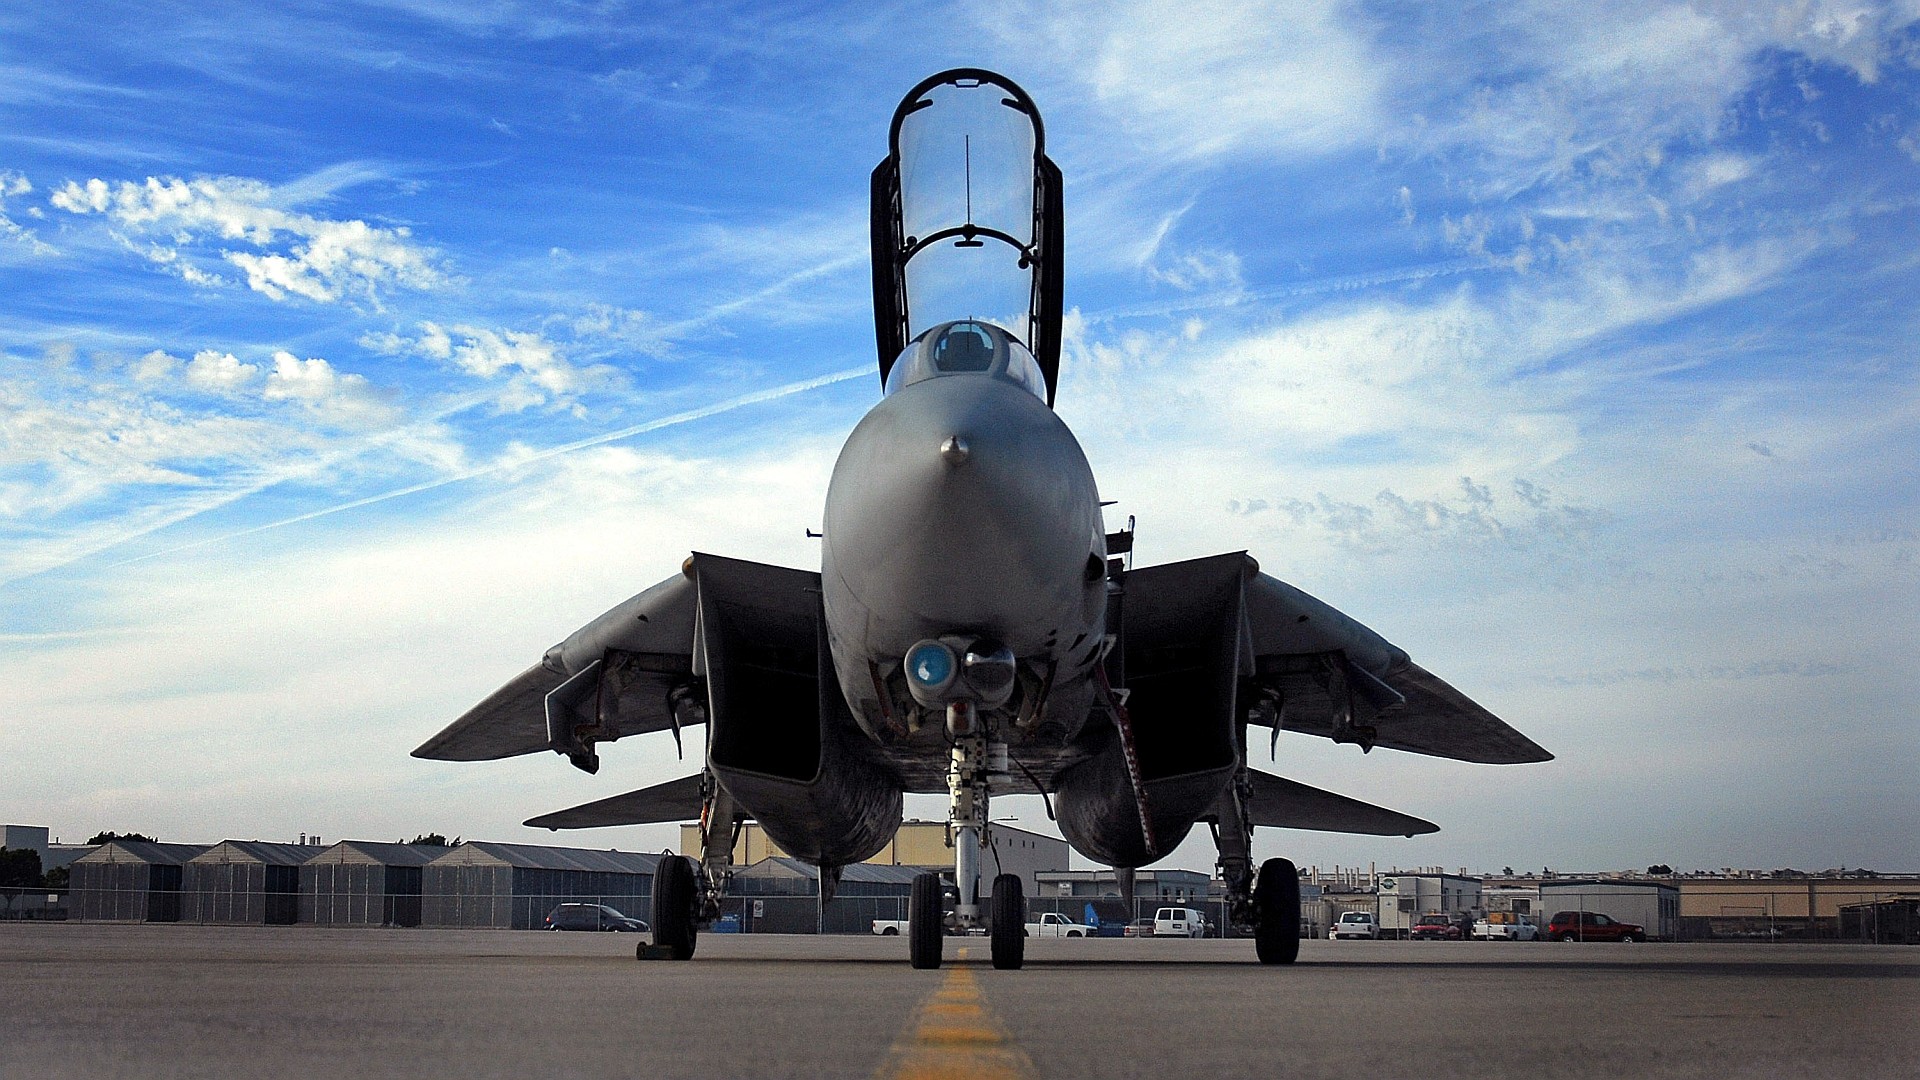 HD wallpaper of a F 14 Tomcat on the tarmac. The widescreen version 2560×1600 of this #wallpaper can be found at cK716ar